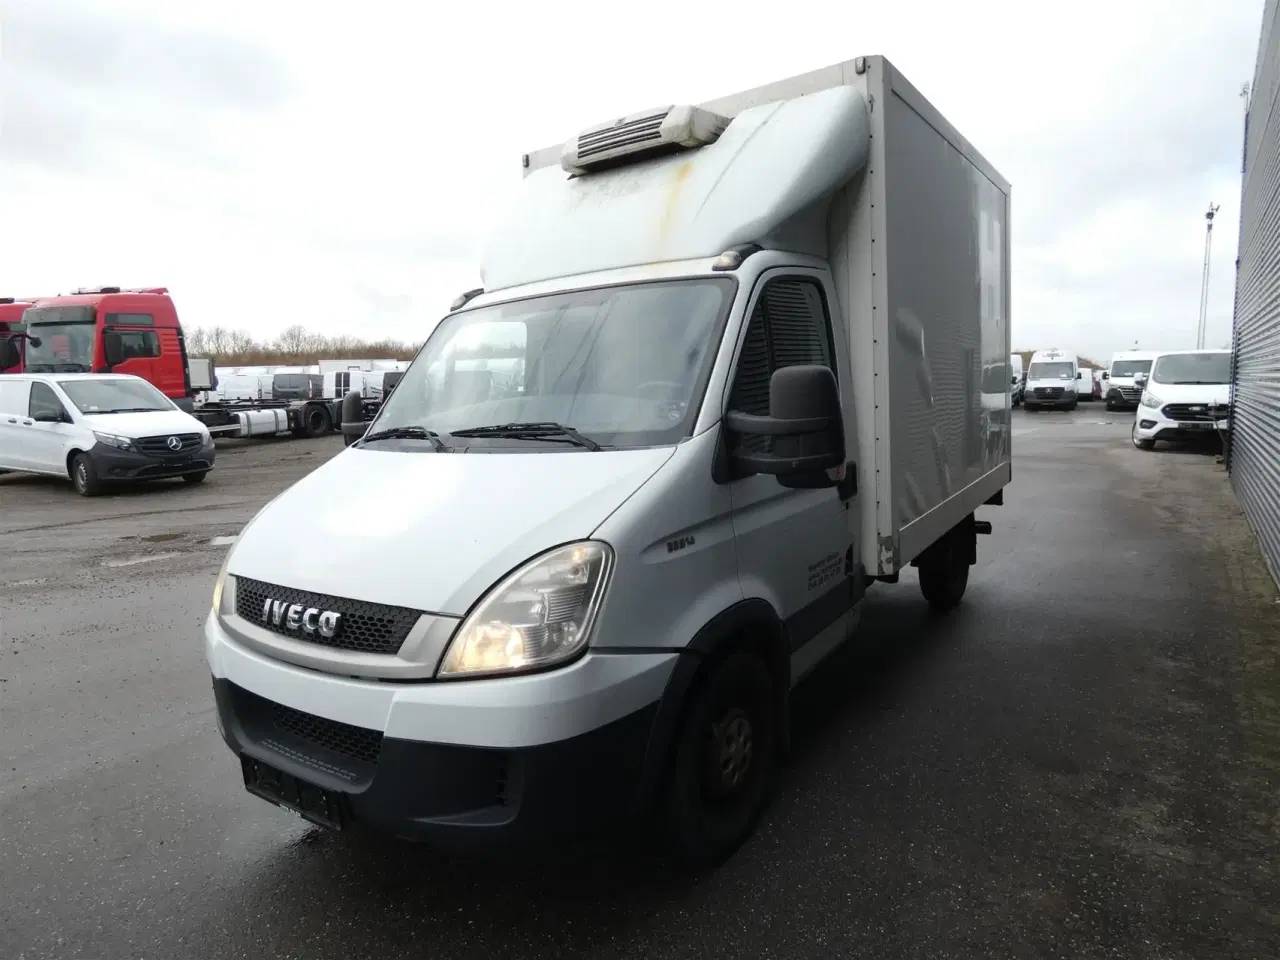 Billede 4 - Iveco Daily 35S14 3450mm 2,3 D 136HK Ladv./Chas.